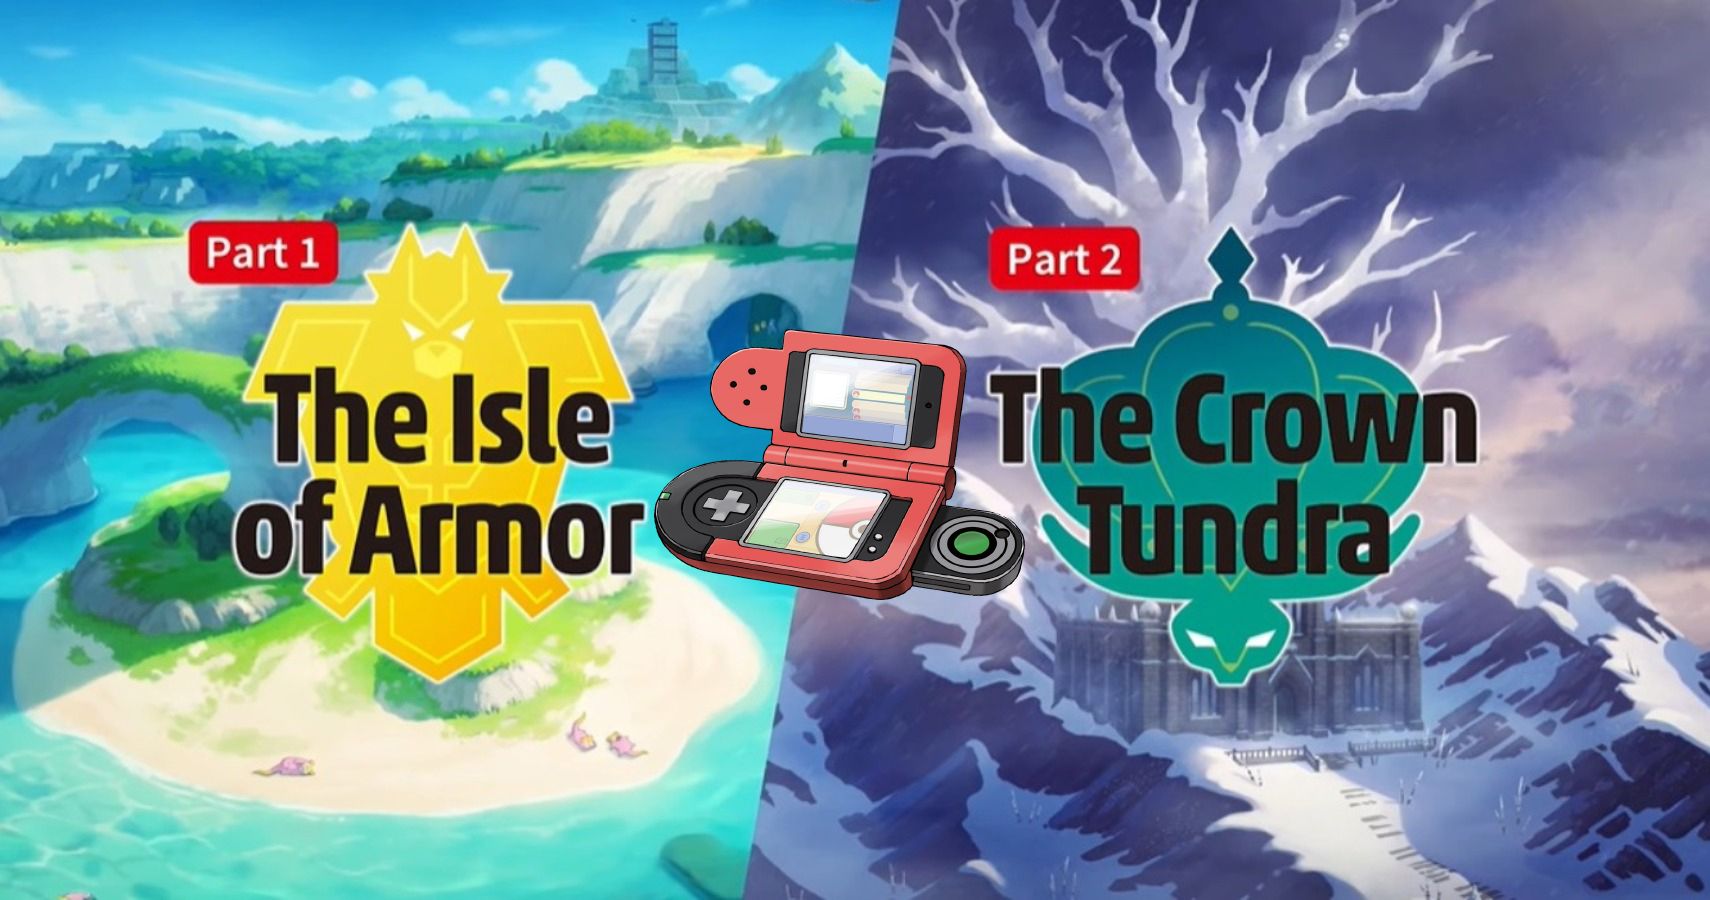 Isle Of Armor And The Crown Tundra Will Have Their Own Pokedexes